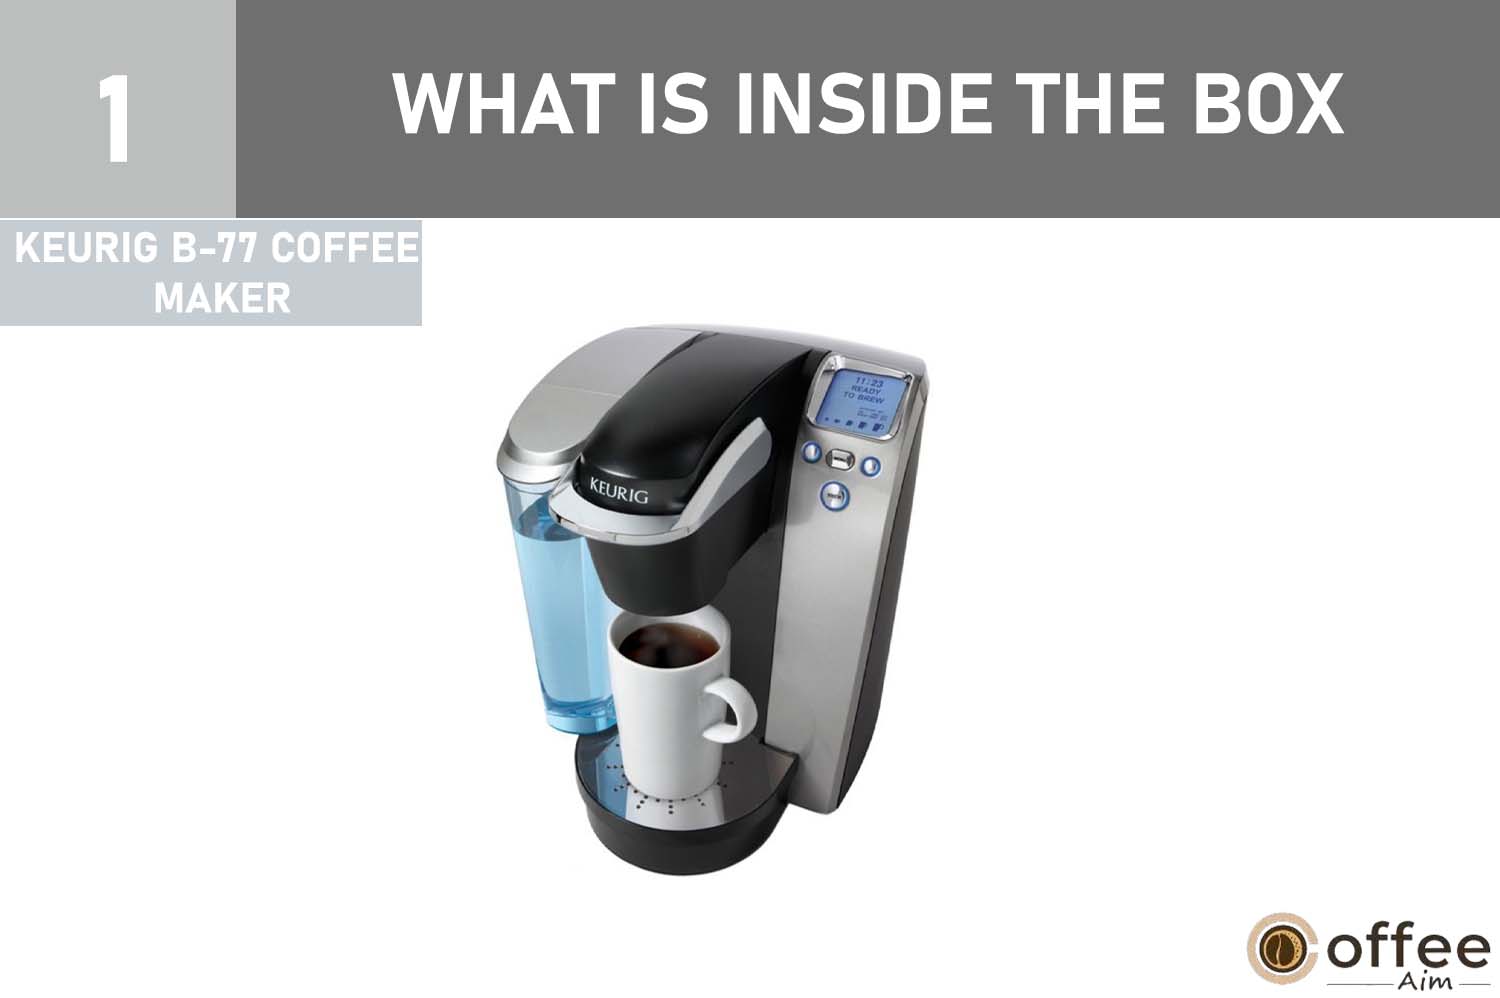 The Keurig B-77 offers delicious coffee on demand, allowing you to enjoy flavorful brews anytime you desire. A convenient and delightful coffee experience awaits!

